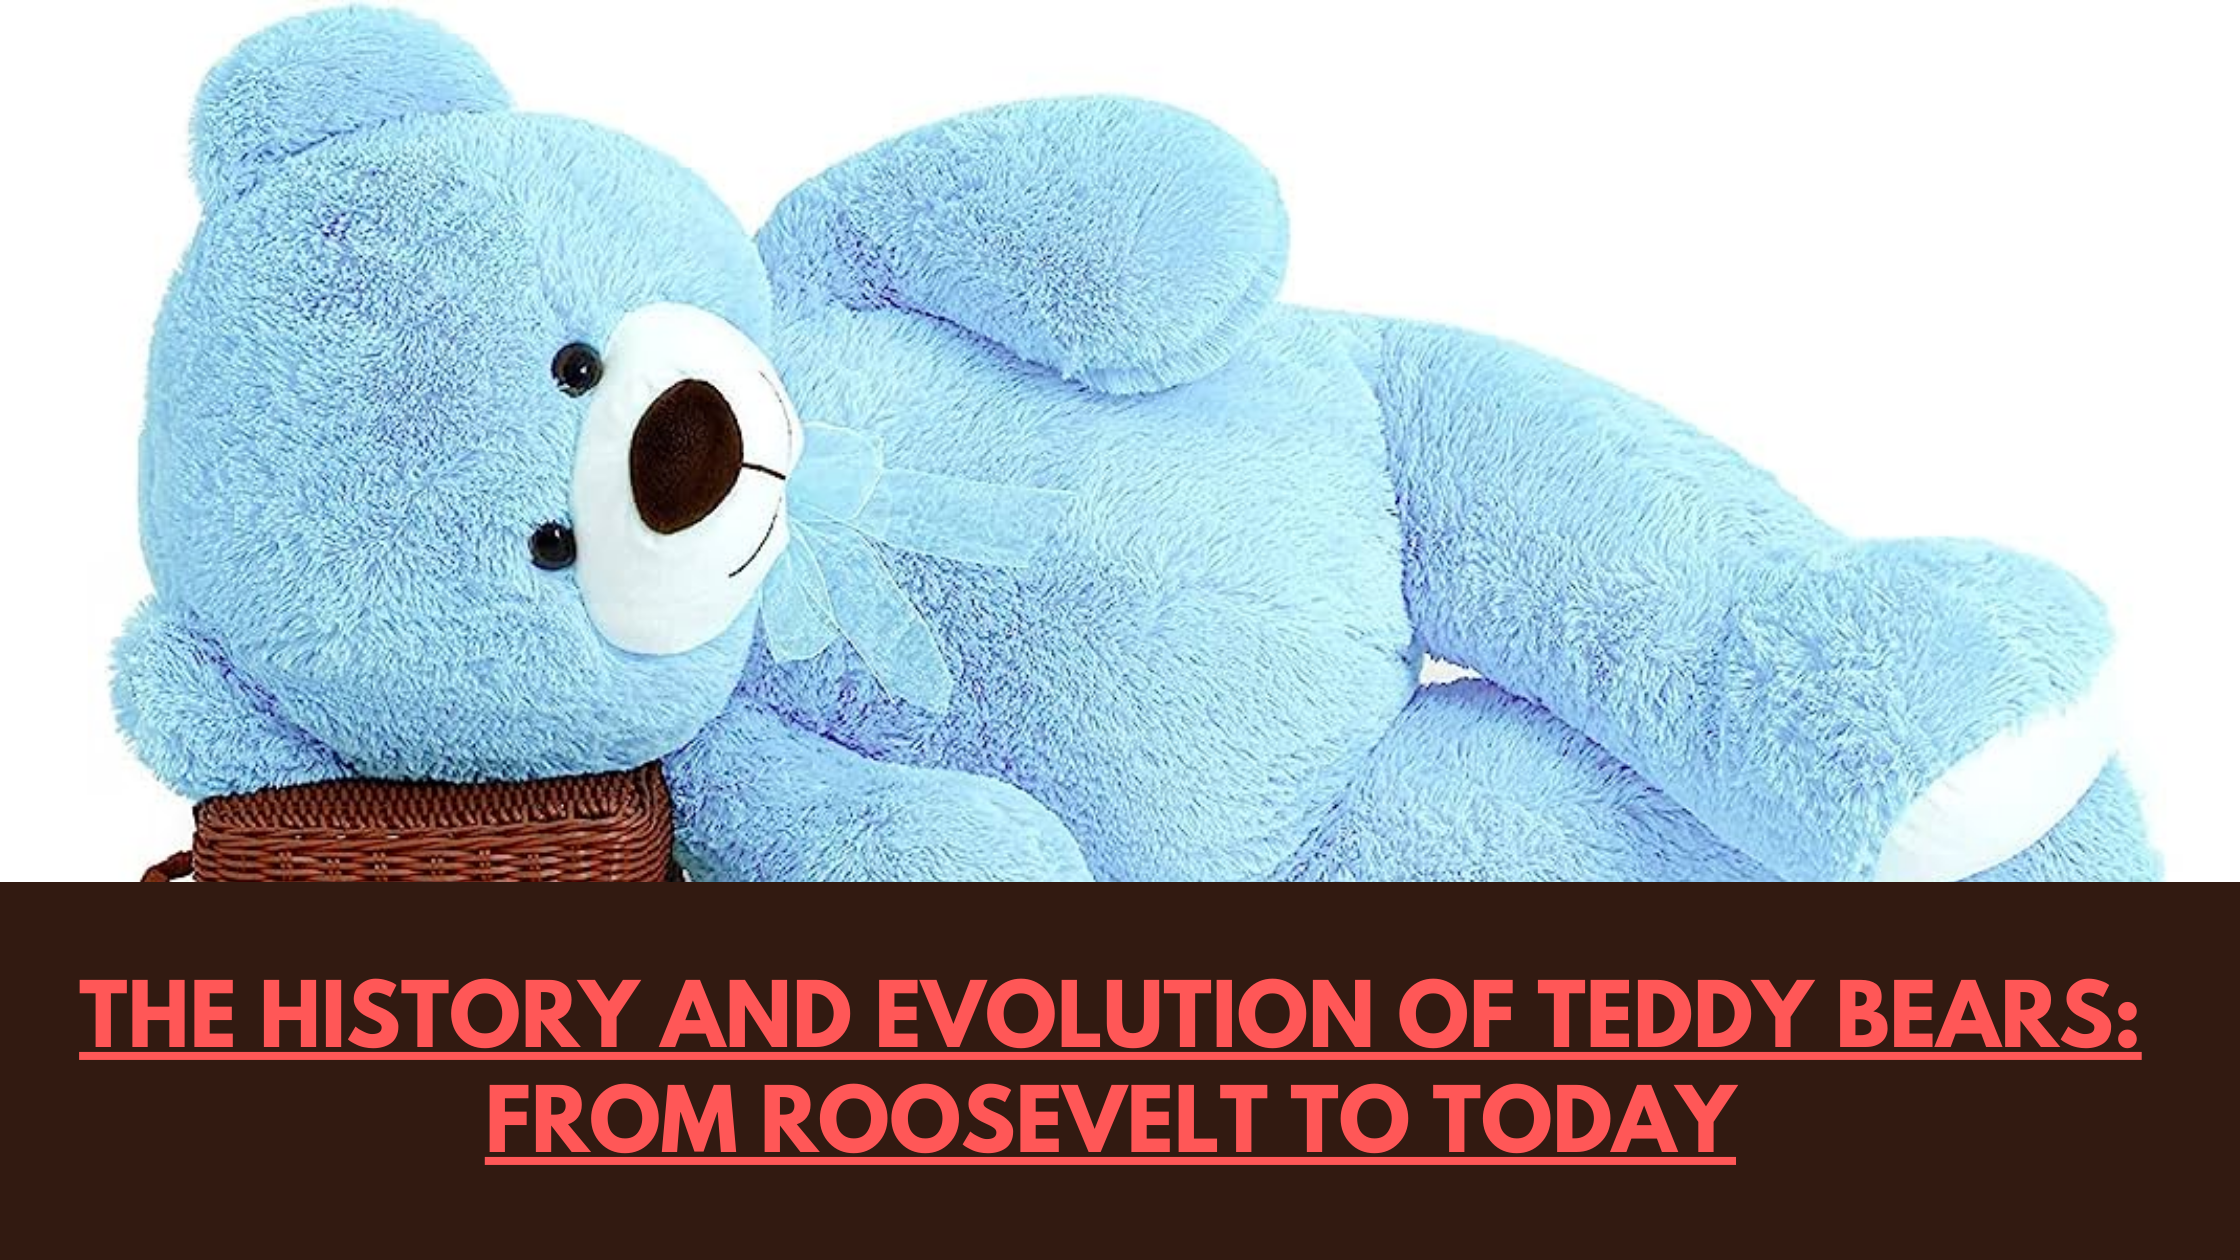 The History and Evolution of Teddy Bears: From Roosevelt to Today